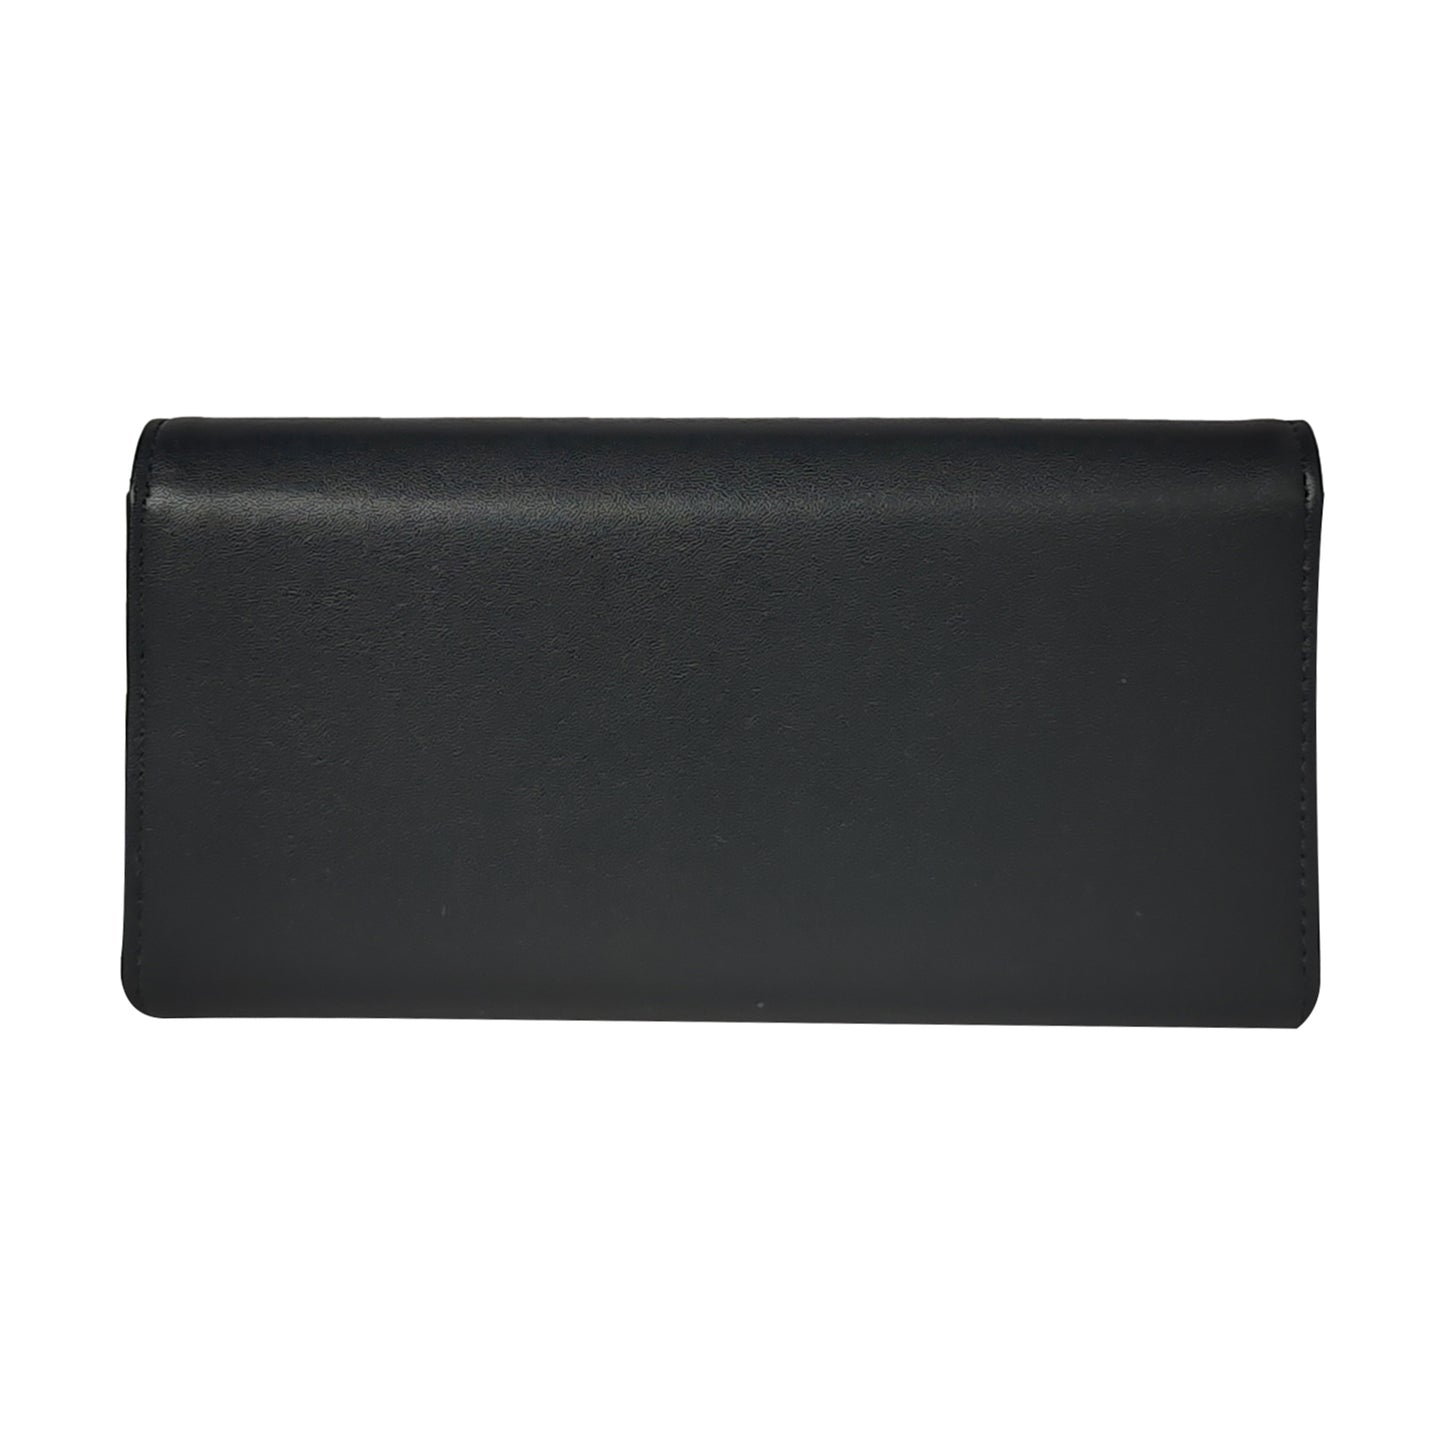 Justbags Women's Classic Style Faux Leather Wallet - Black